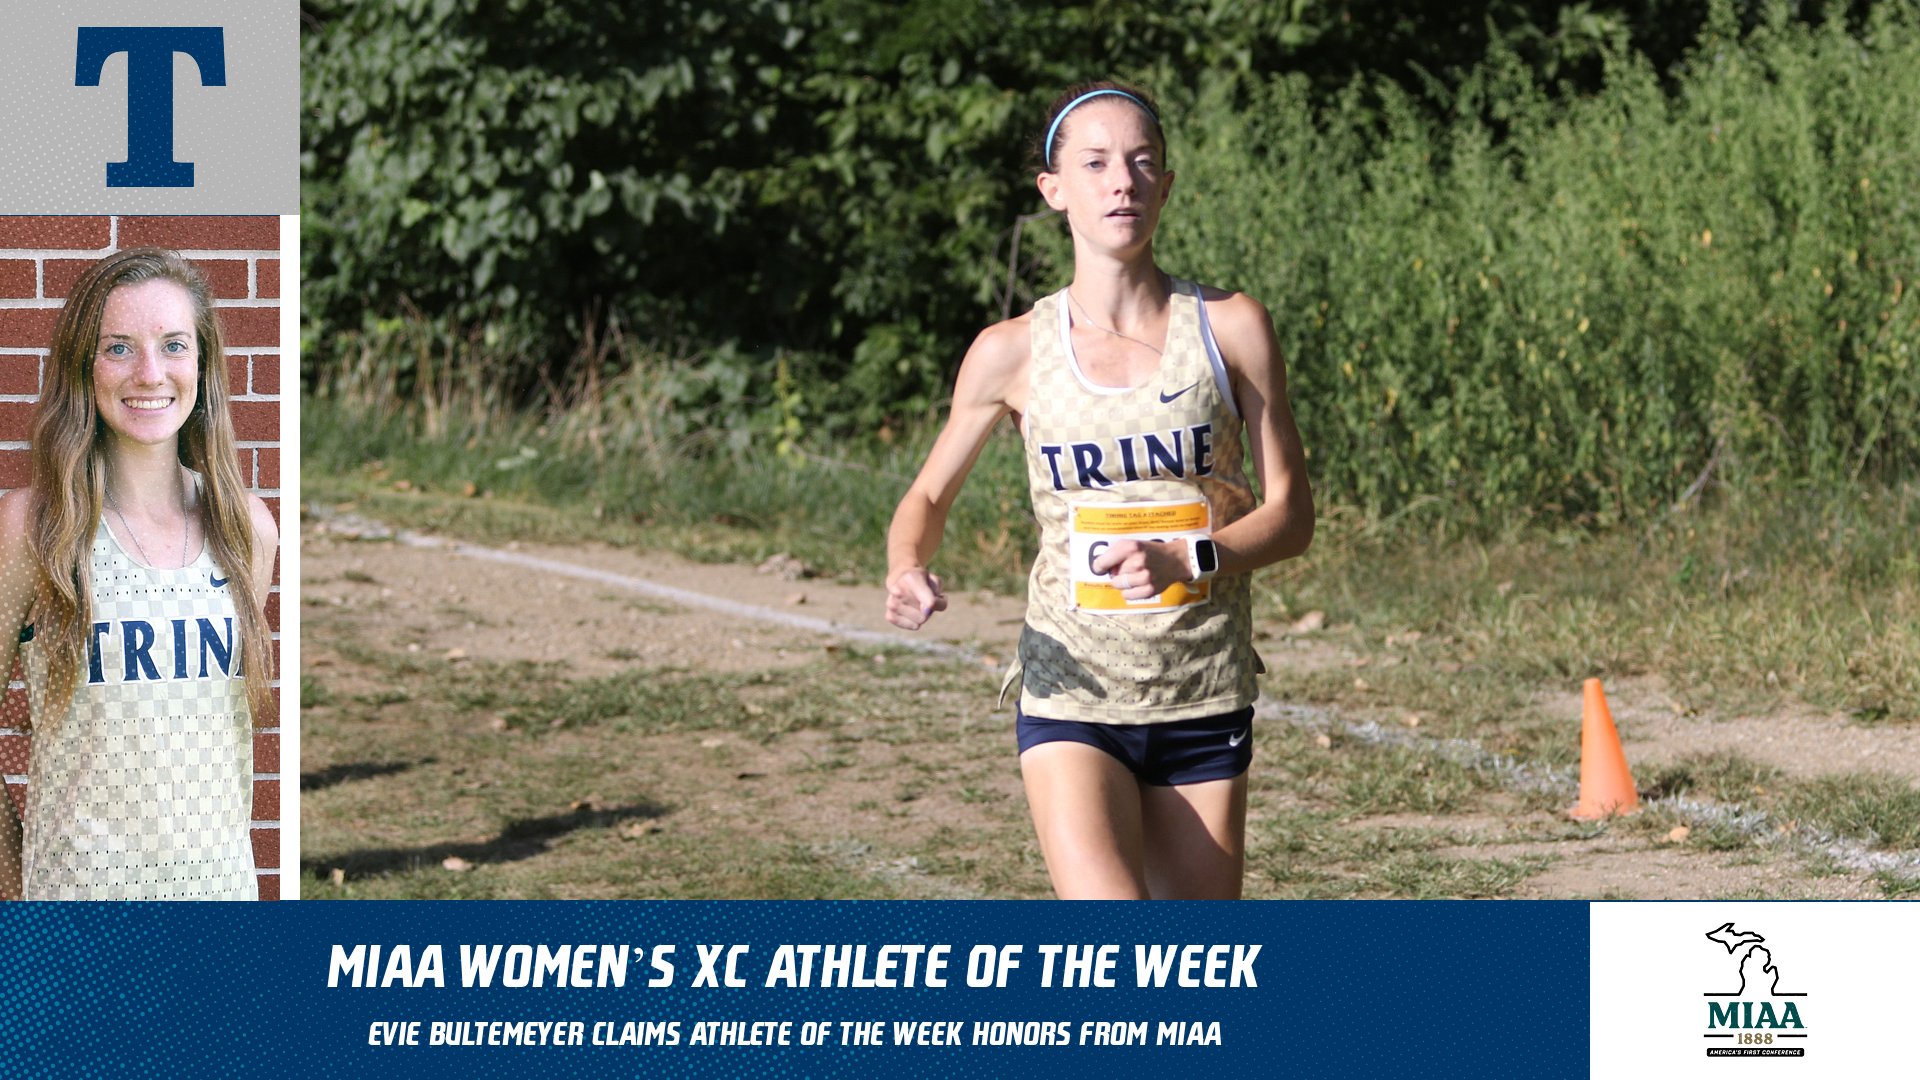 Evie Bultemeyer Claims Athlete of the Week Honors from MIAA